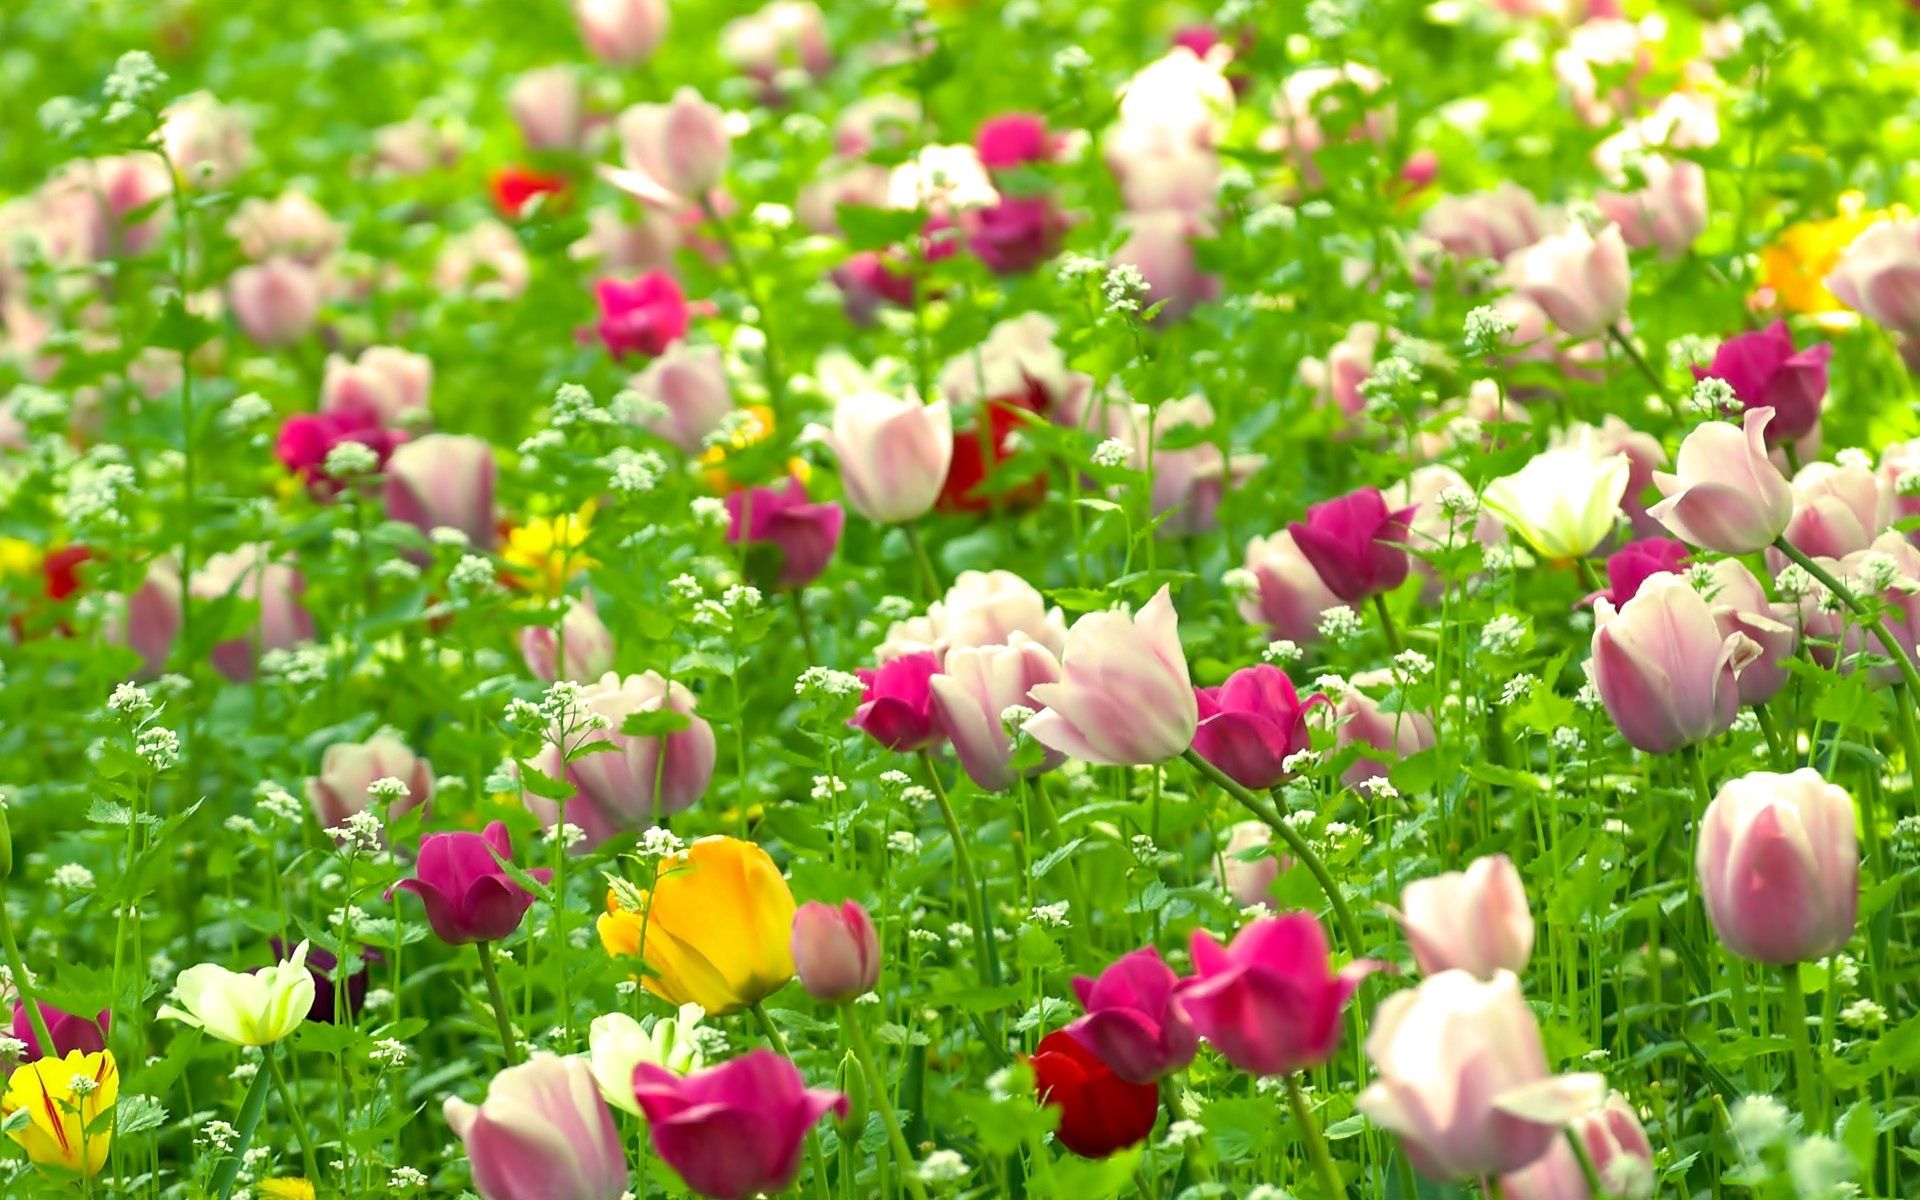 56986 download wallpaper tulips, nature, flowers, summer, field screensavers and pictures for free